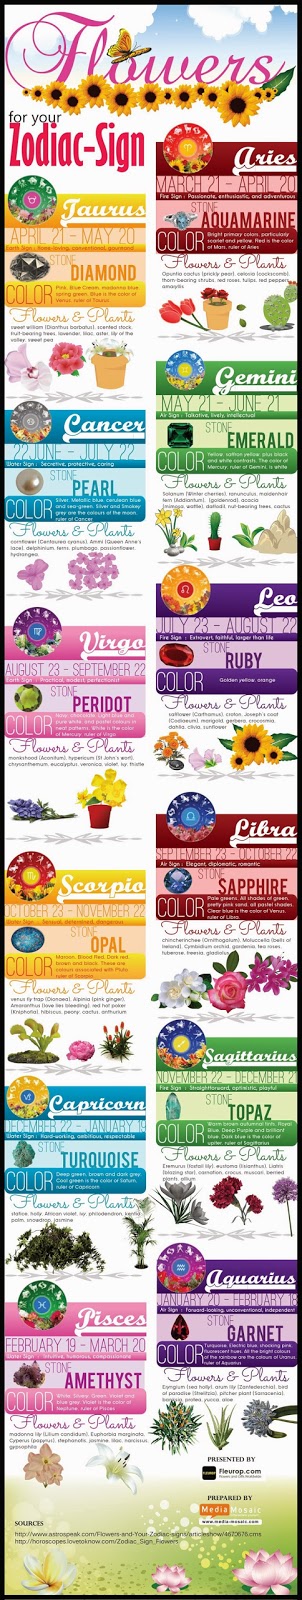 Flowers for Your Zodiac Sign